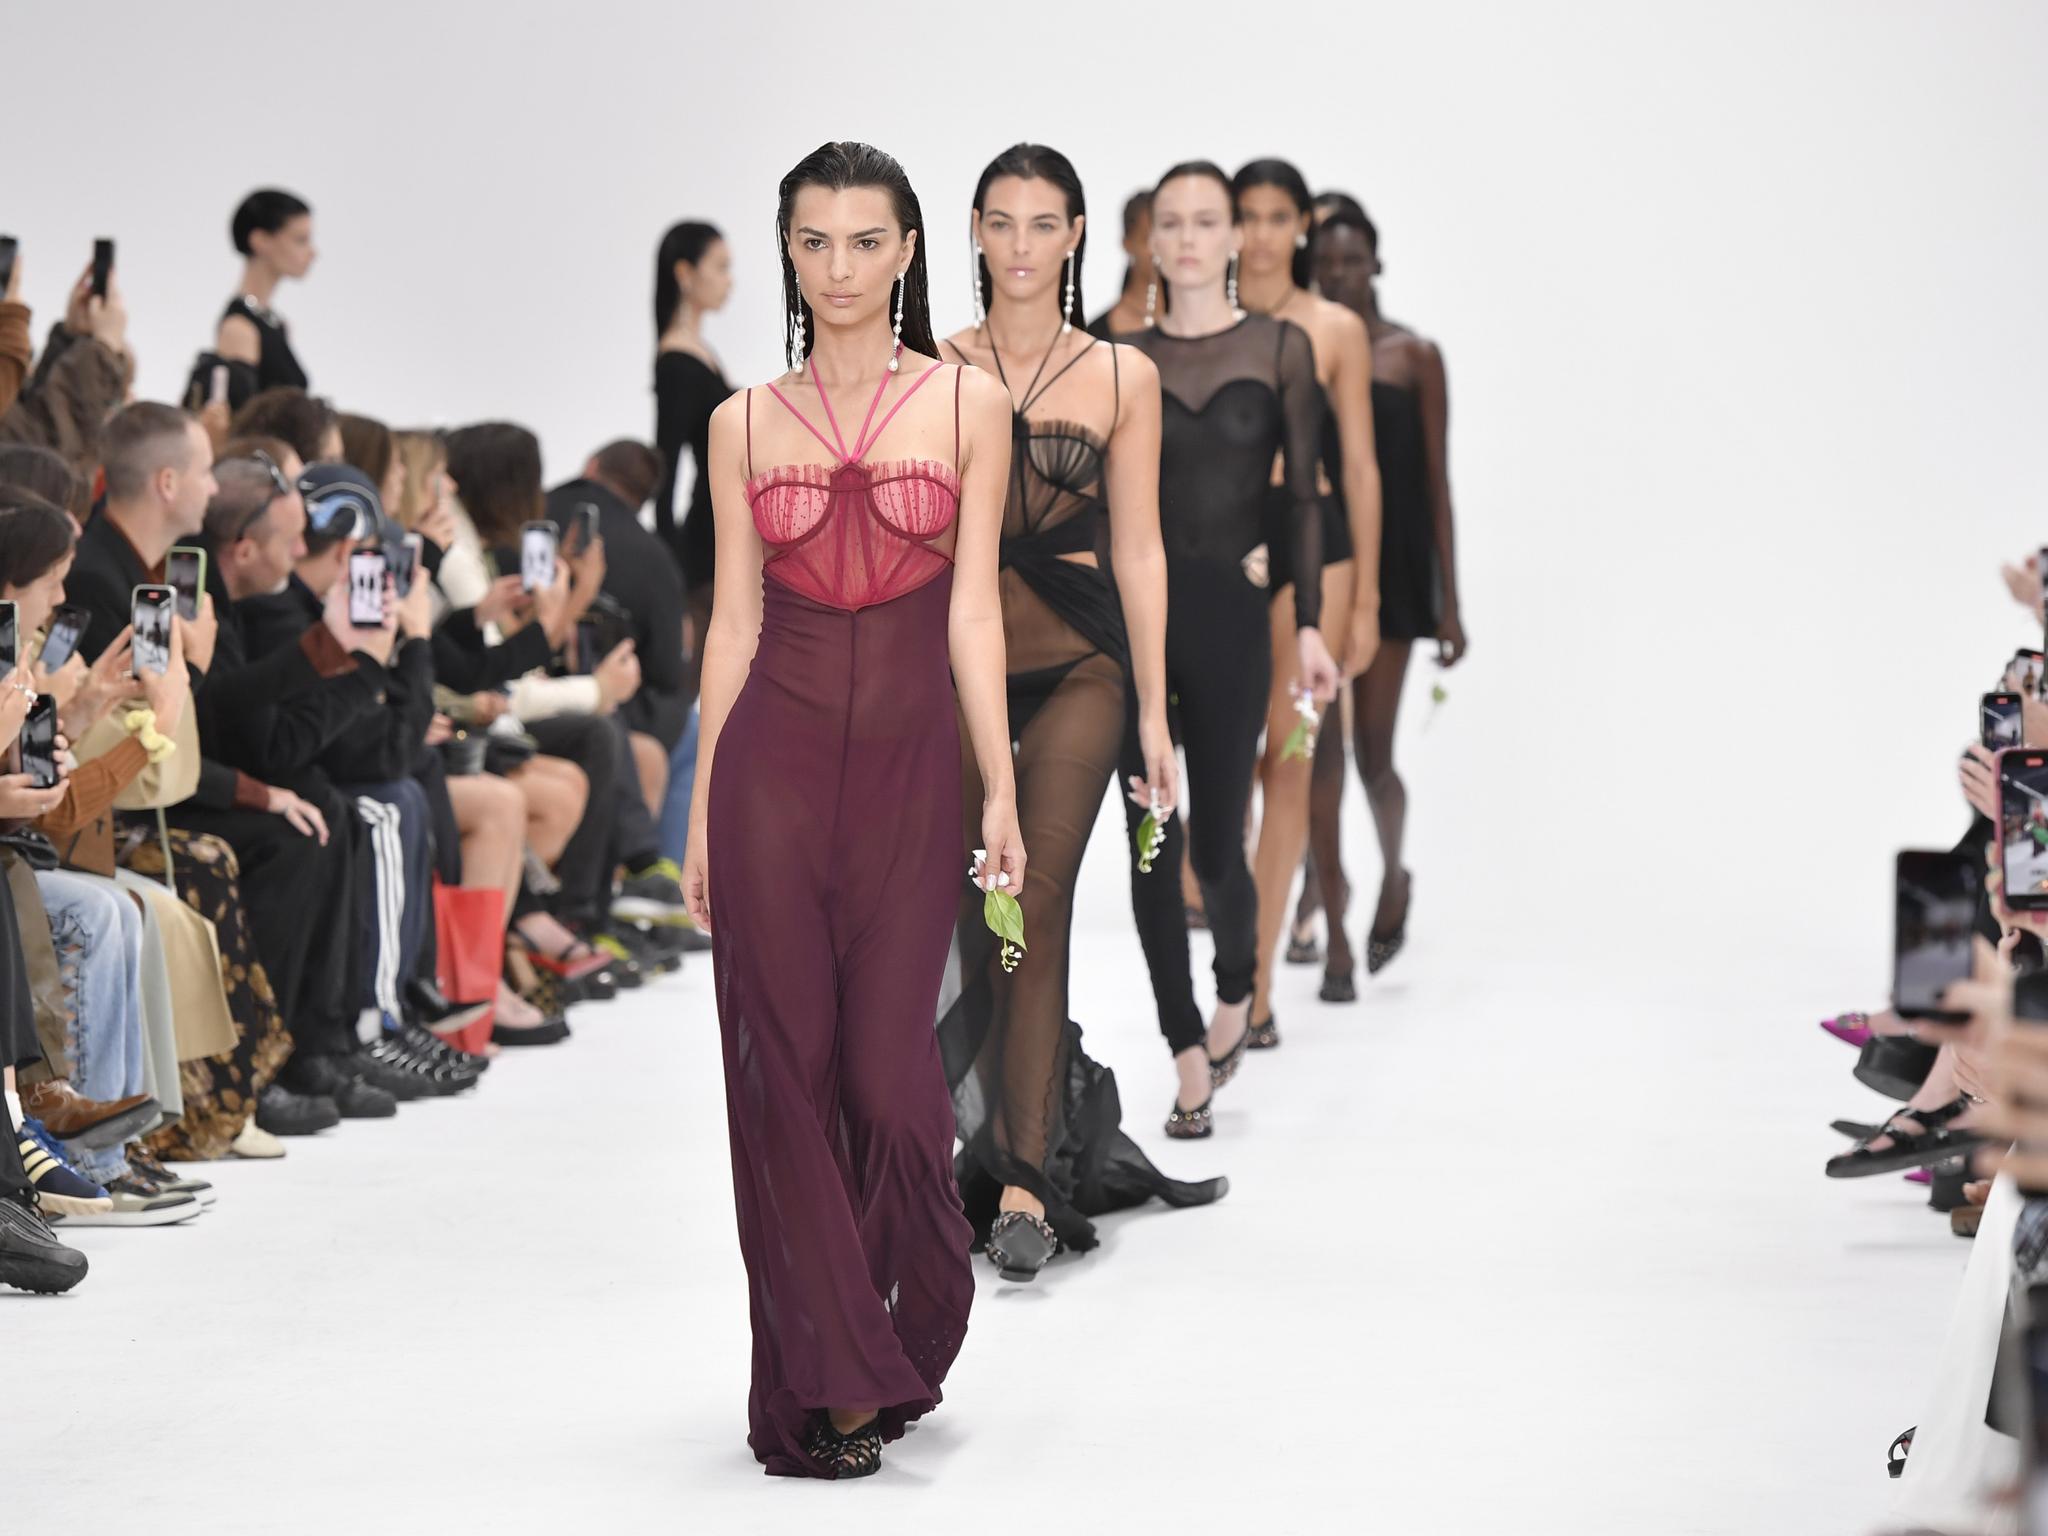 Milan Fashion Week: How far has Daniel Lee bent the rules for his